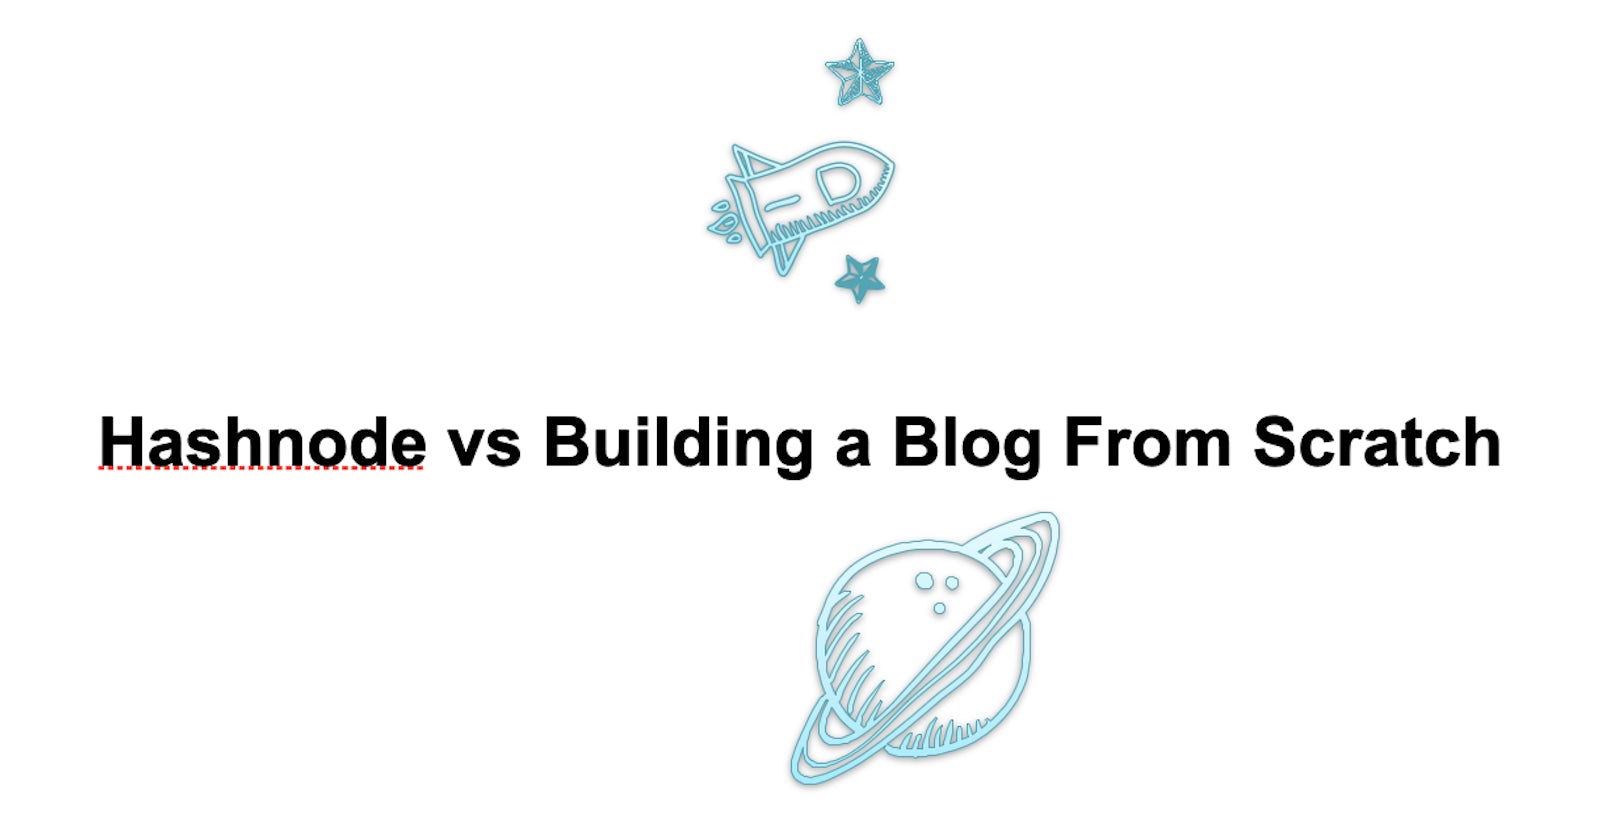 My Thoughts on Using Hashnode vs Building a Blog From Scratch